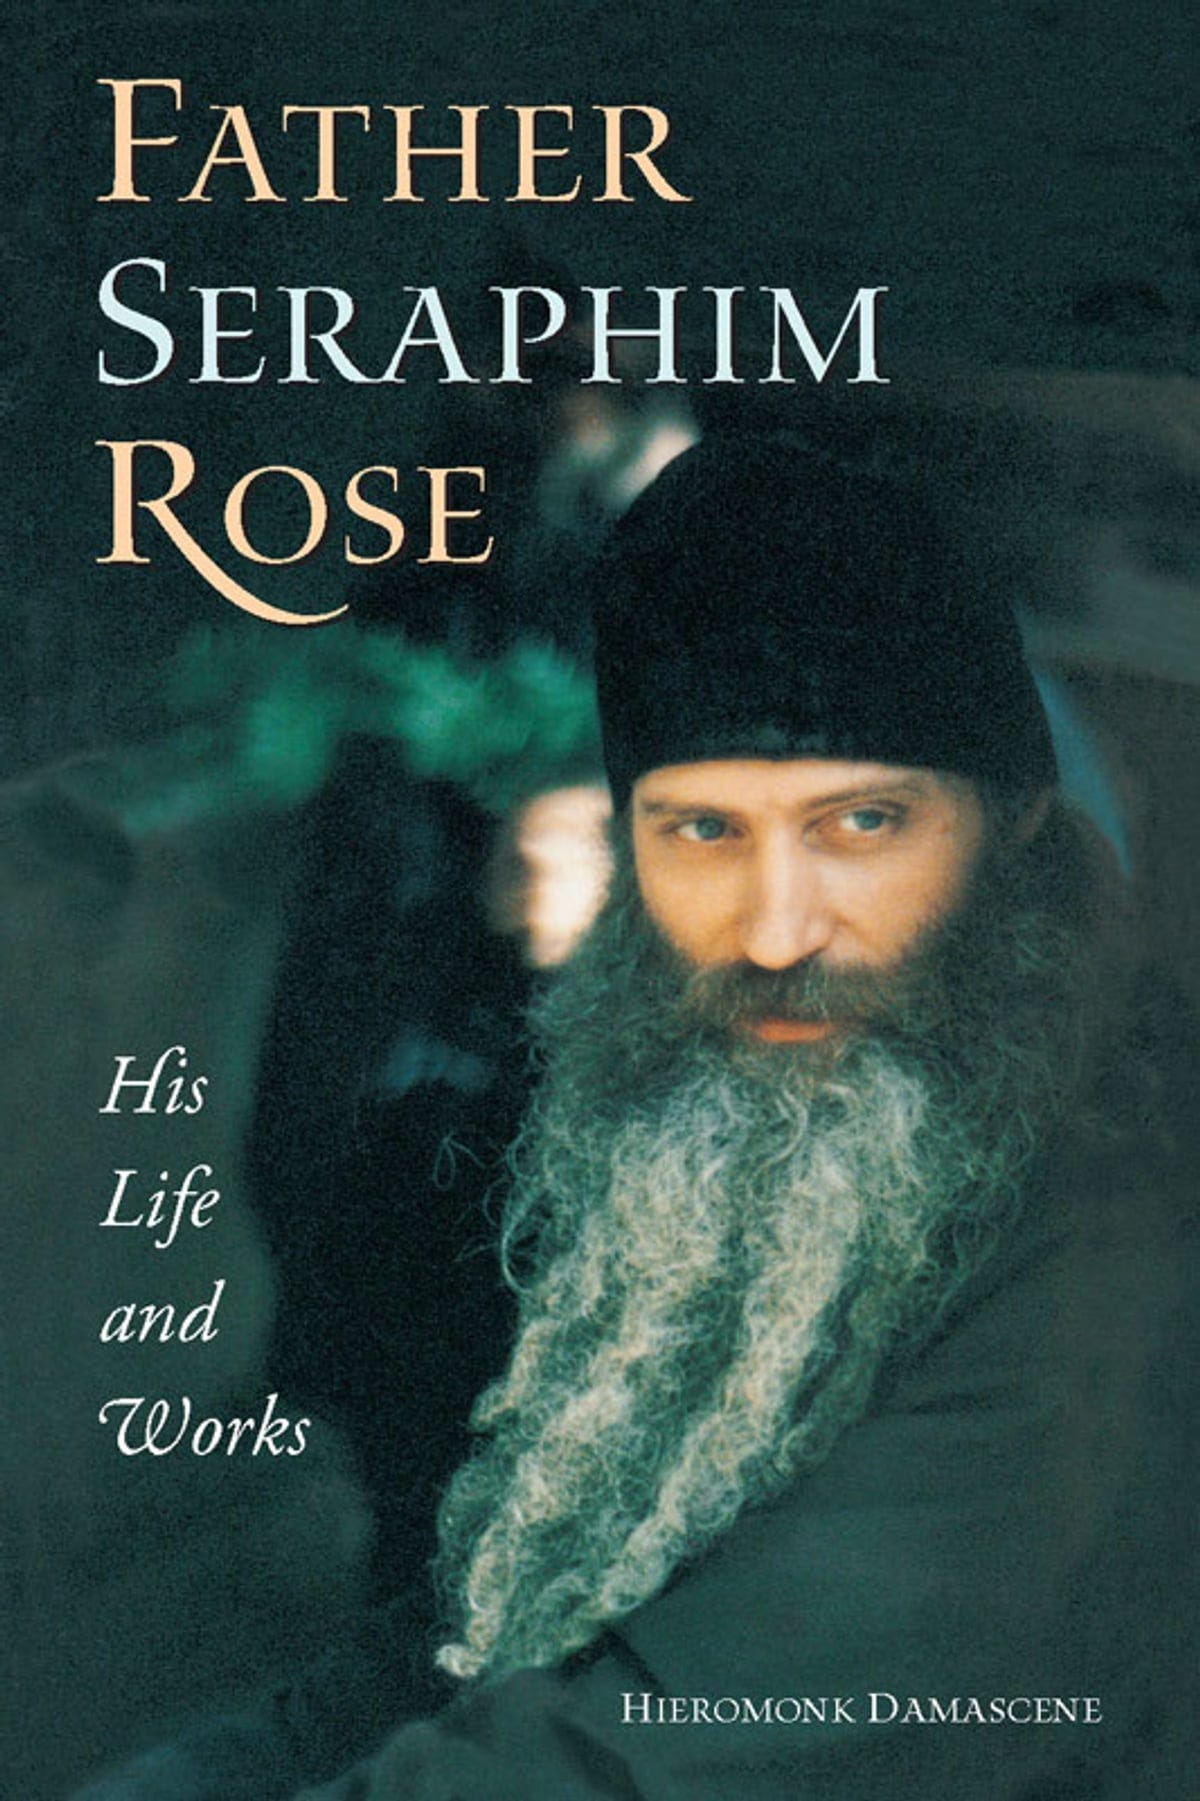 Father Seraphim Rose: His Life and Works eBook by Hieromonk Damascene ...